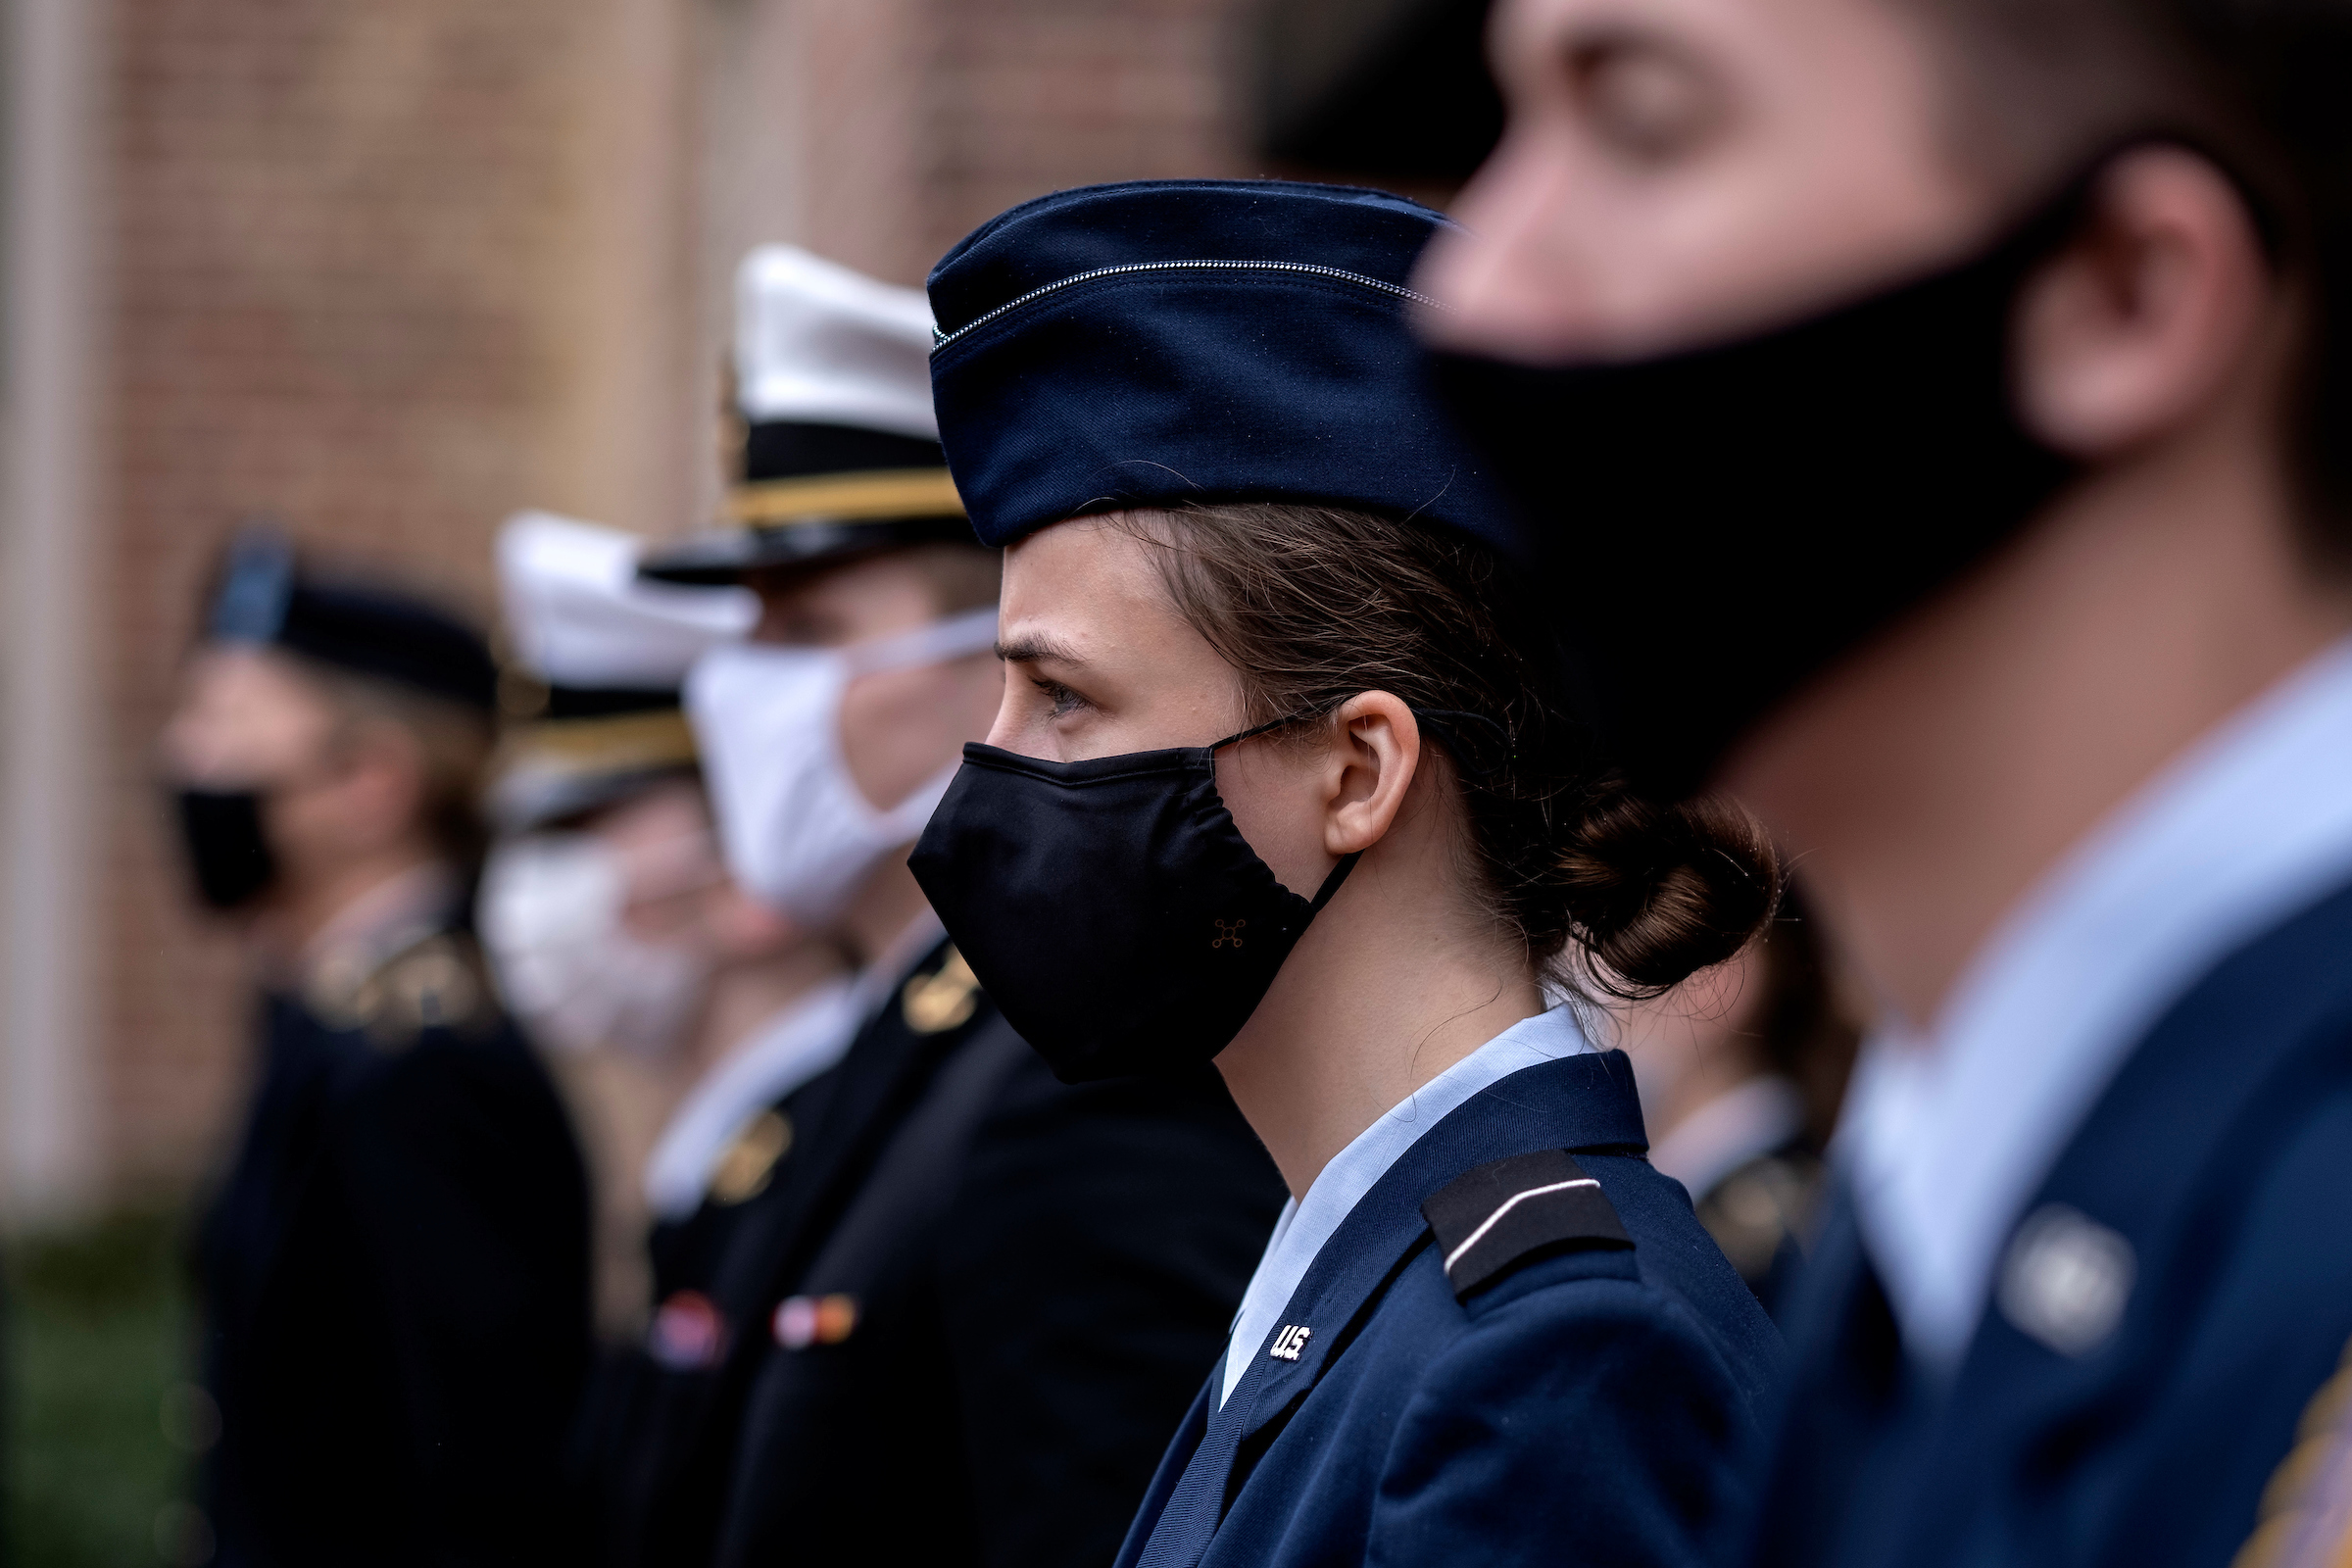 Students wearing military regalia and a mask